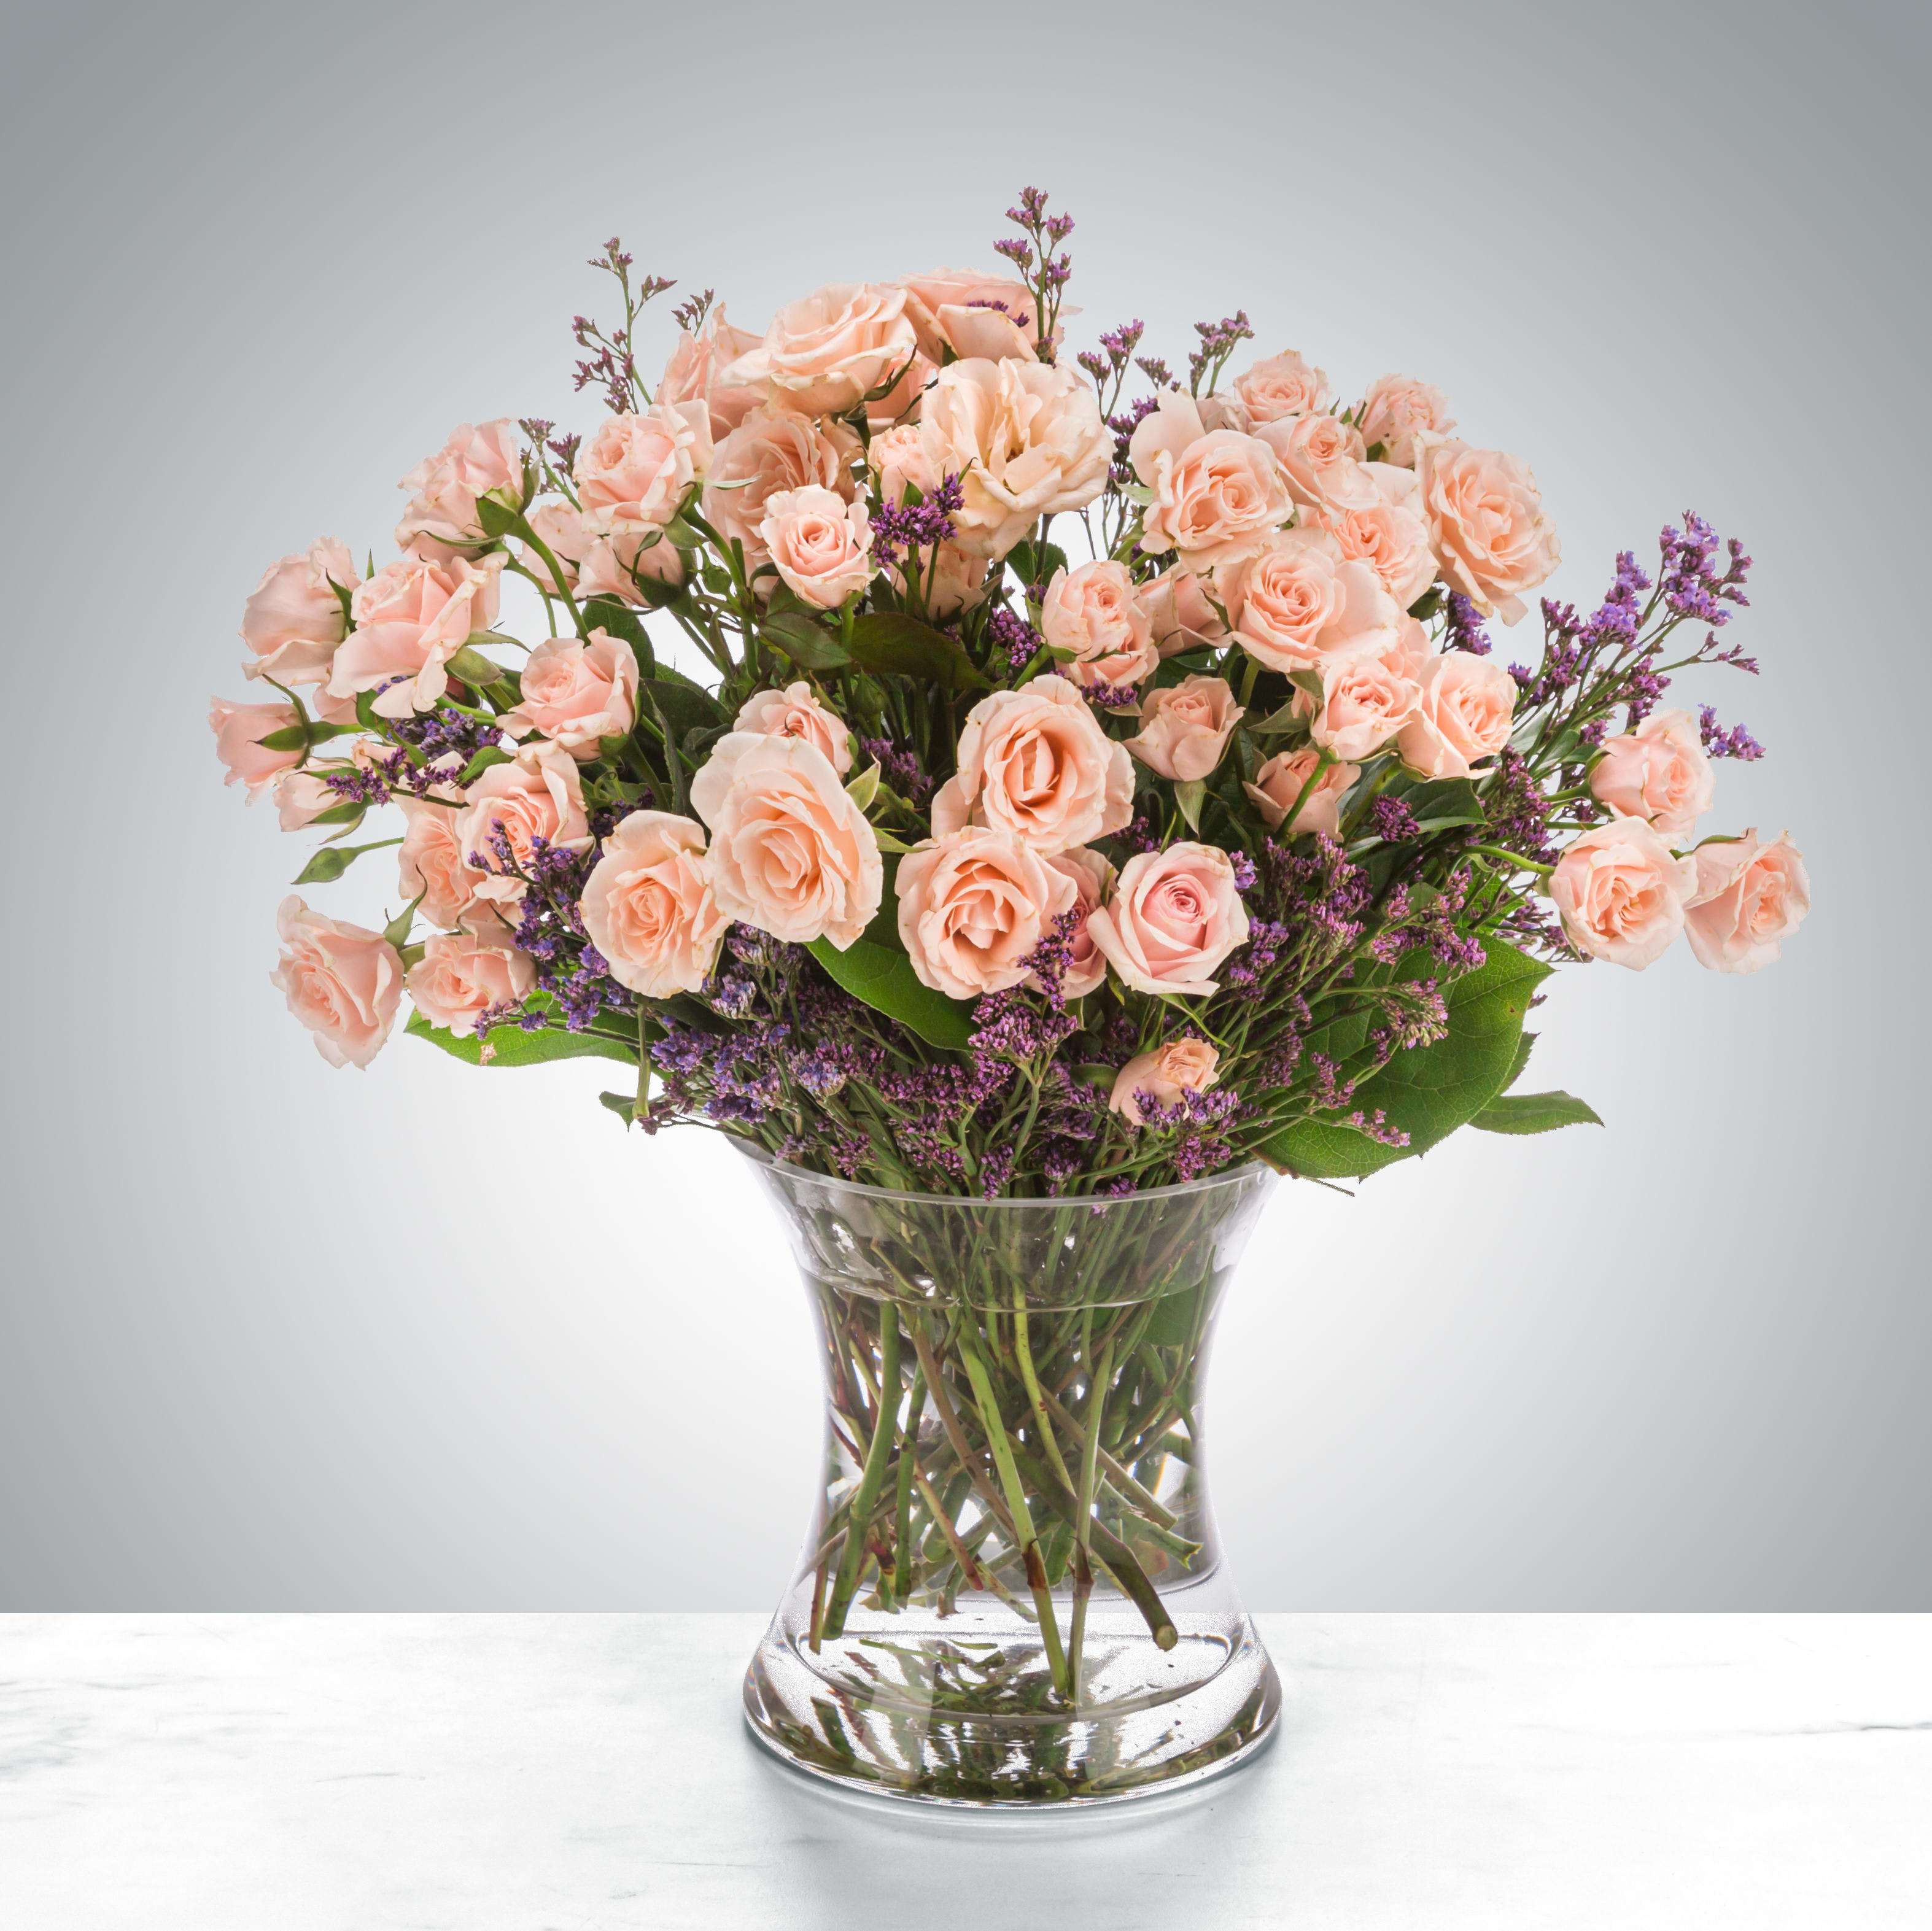 Rose Gold by BloomNation™ - A chic twist on sending somebody the classic dozen, spray roses are a great way to say you care in a lot of ways. Send blush spray roses for Breast Cancer Awareness Month, International Women's Day, or just because.  1st Image: Standard 2nd Image: Premium